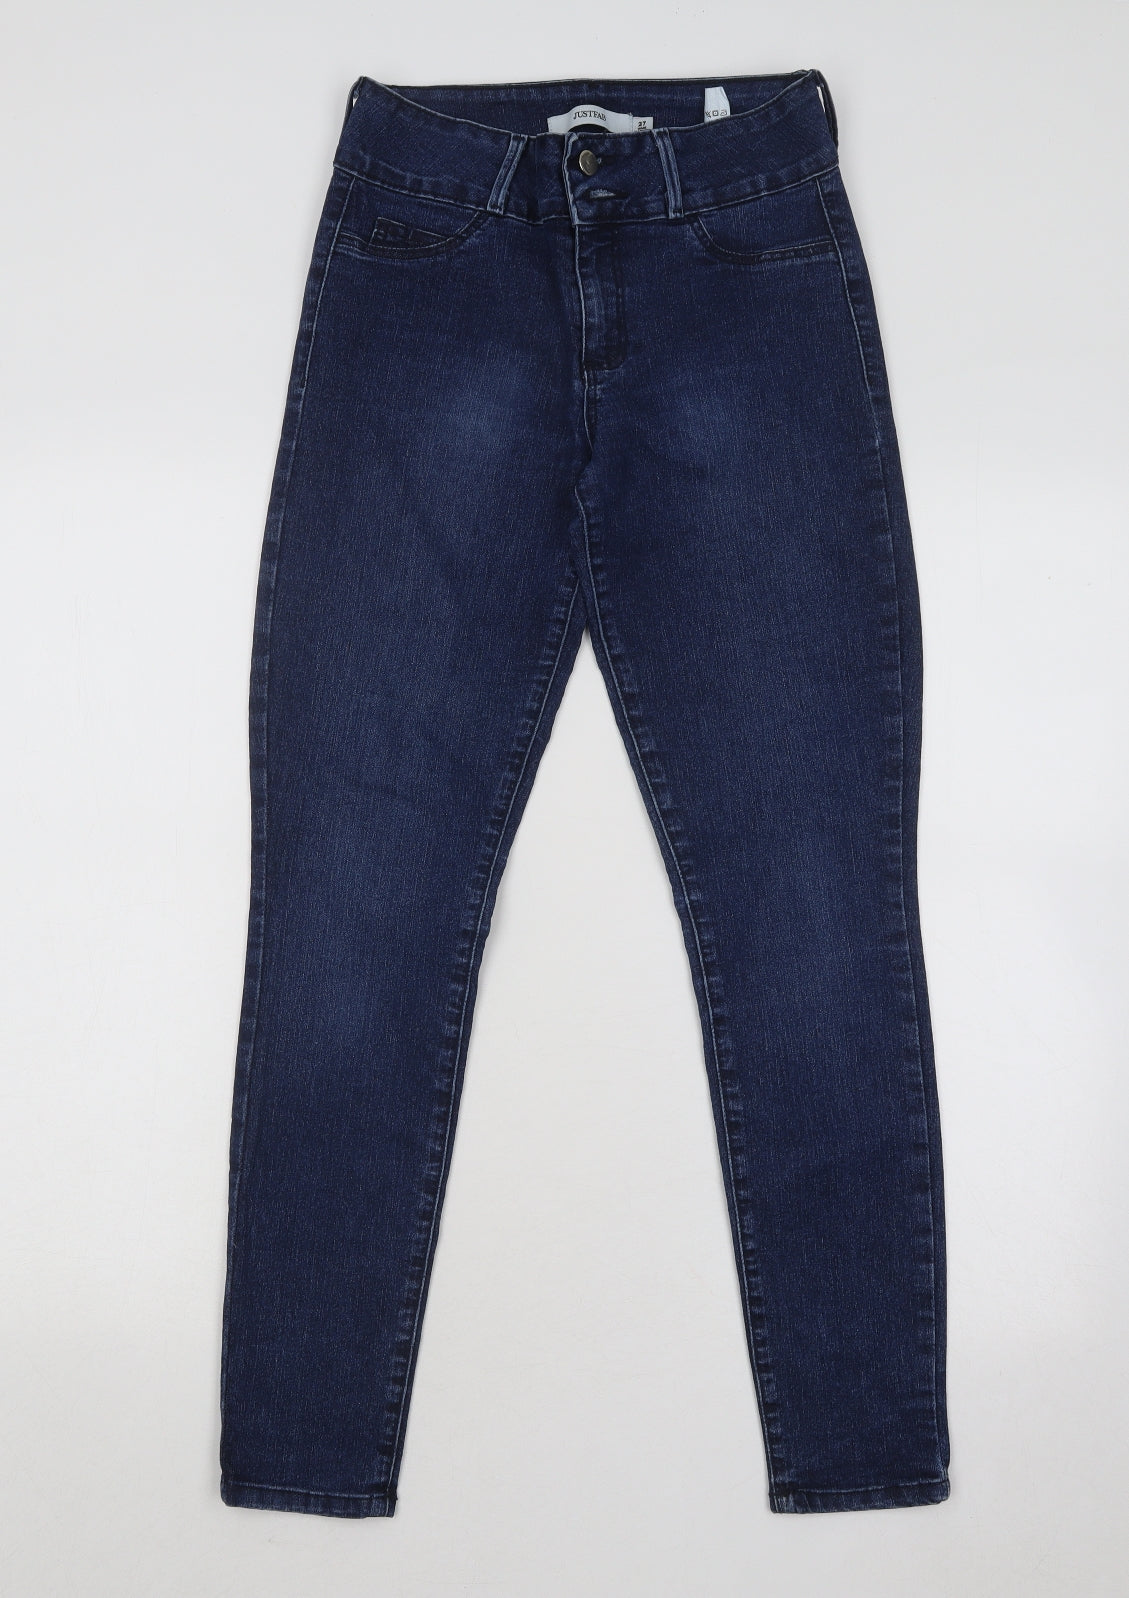 JustFab Womens Blue Cotton Skinny Jeans Size 27 in L27 in Regular Button